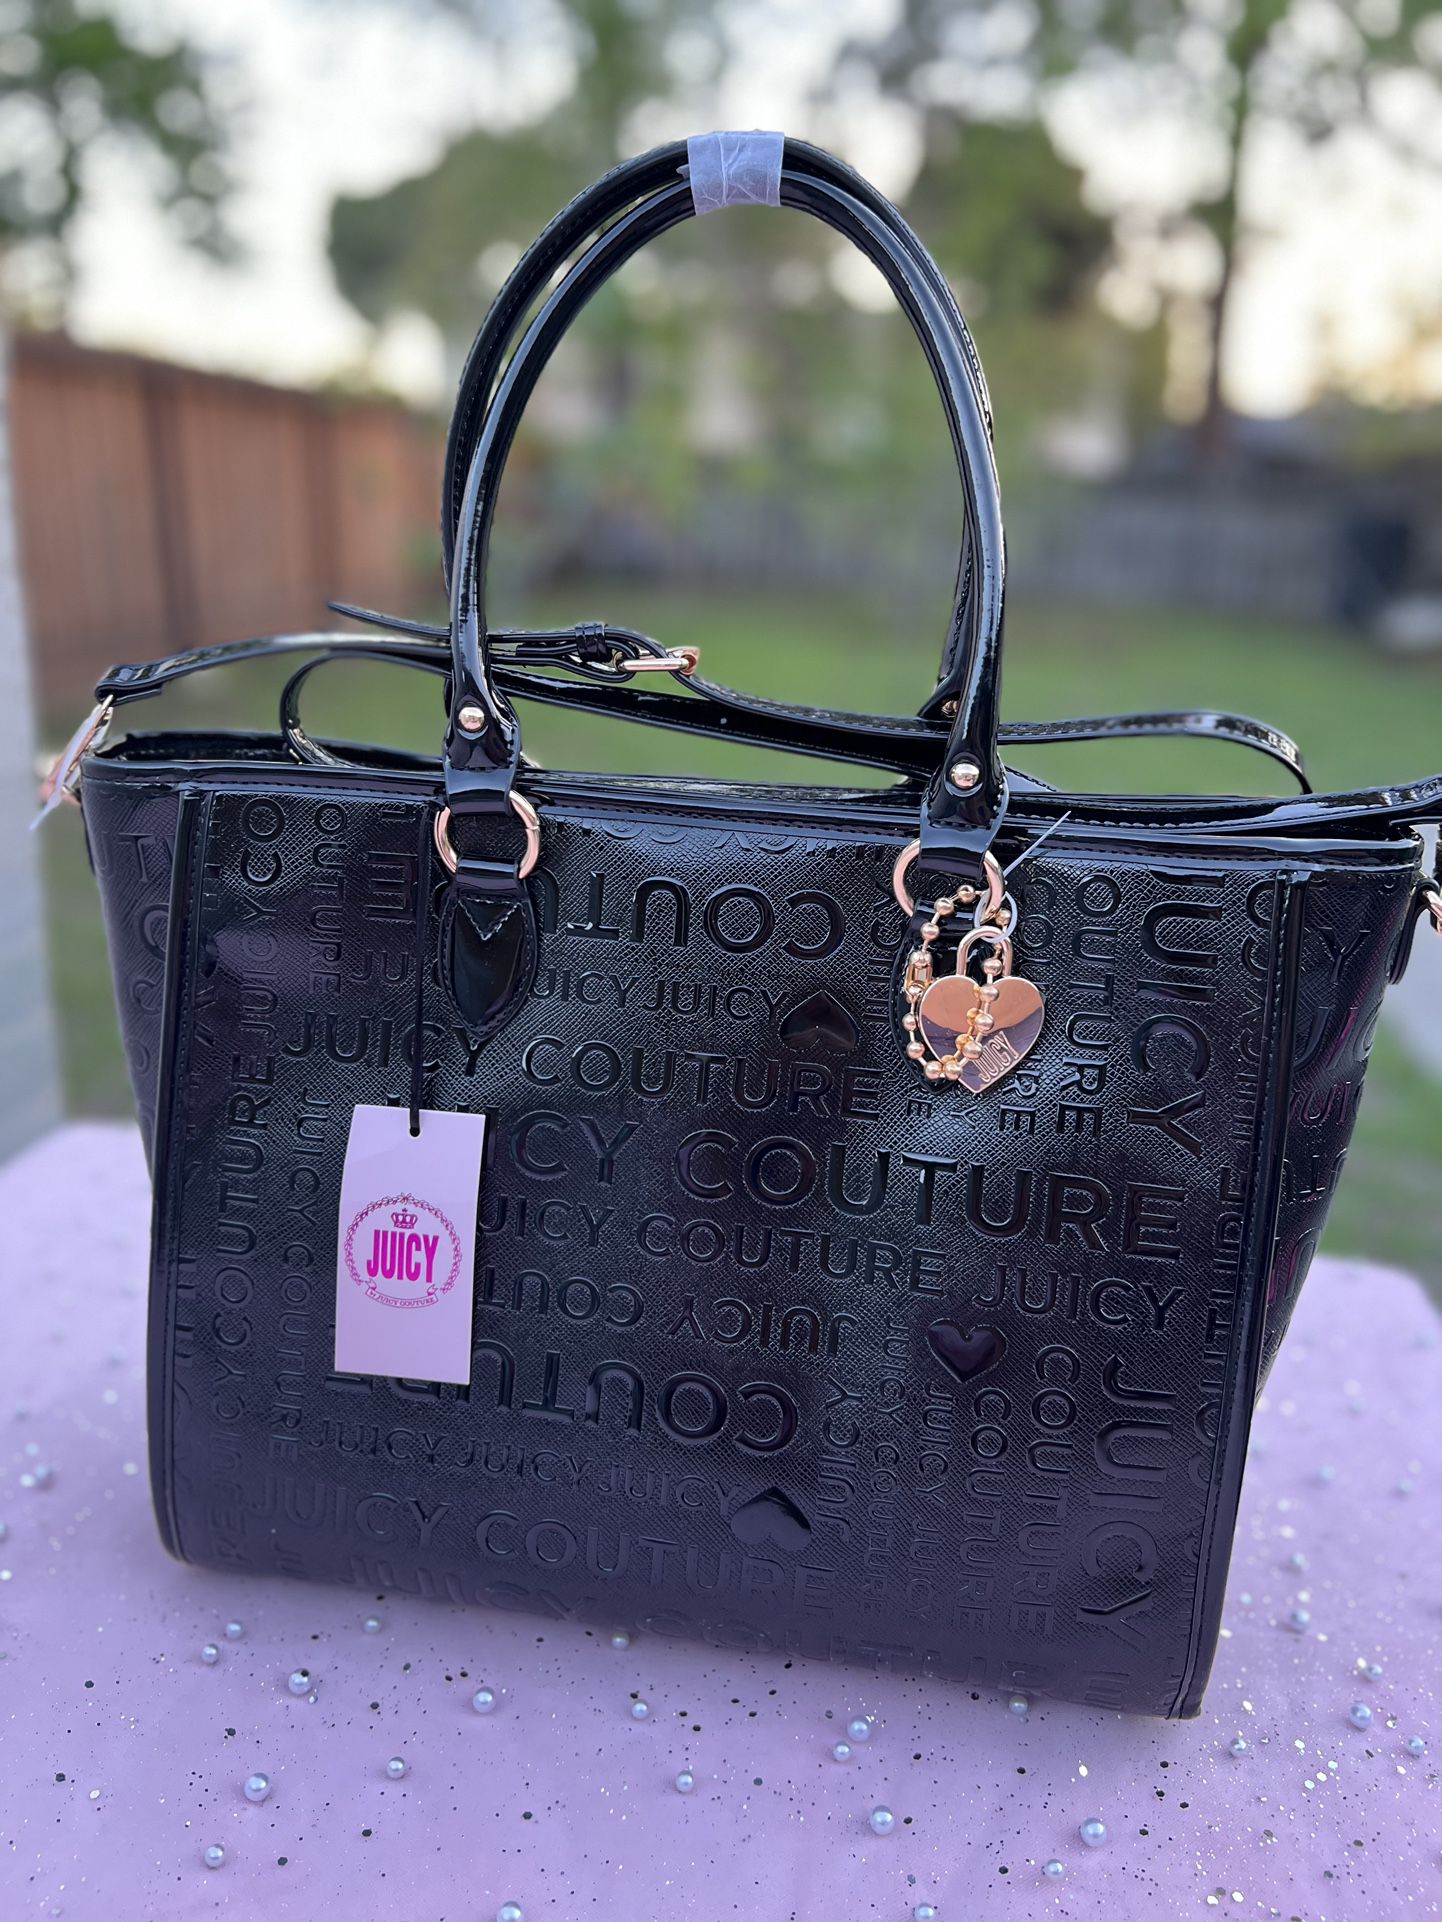 Authentic Juicy Couture Large Tote Brand New